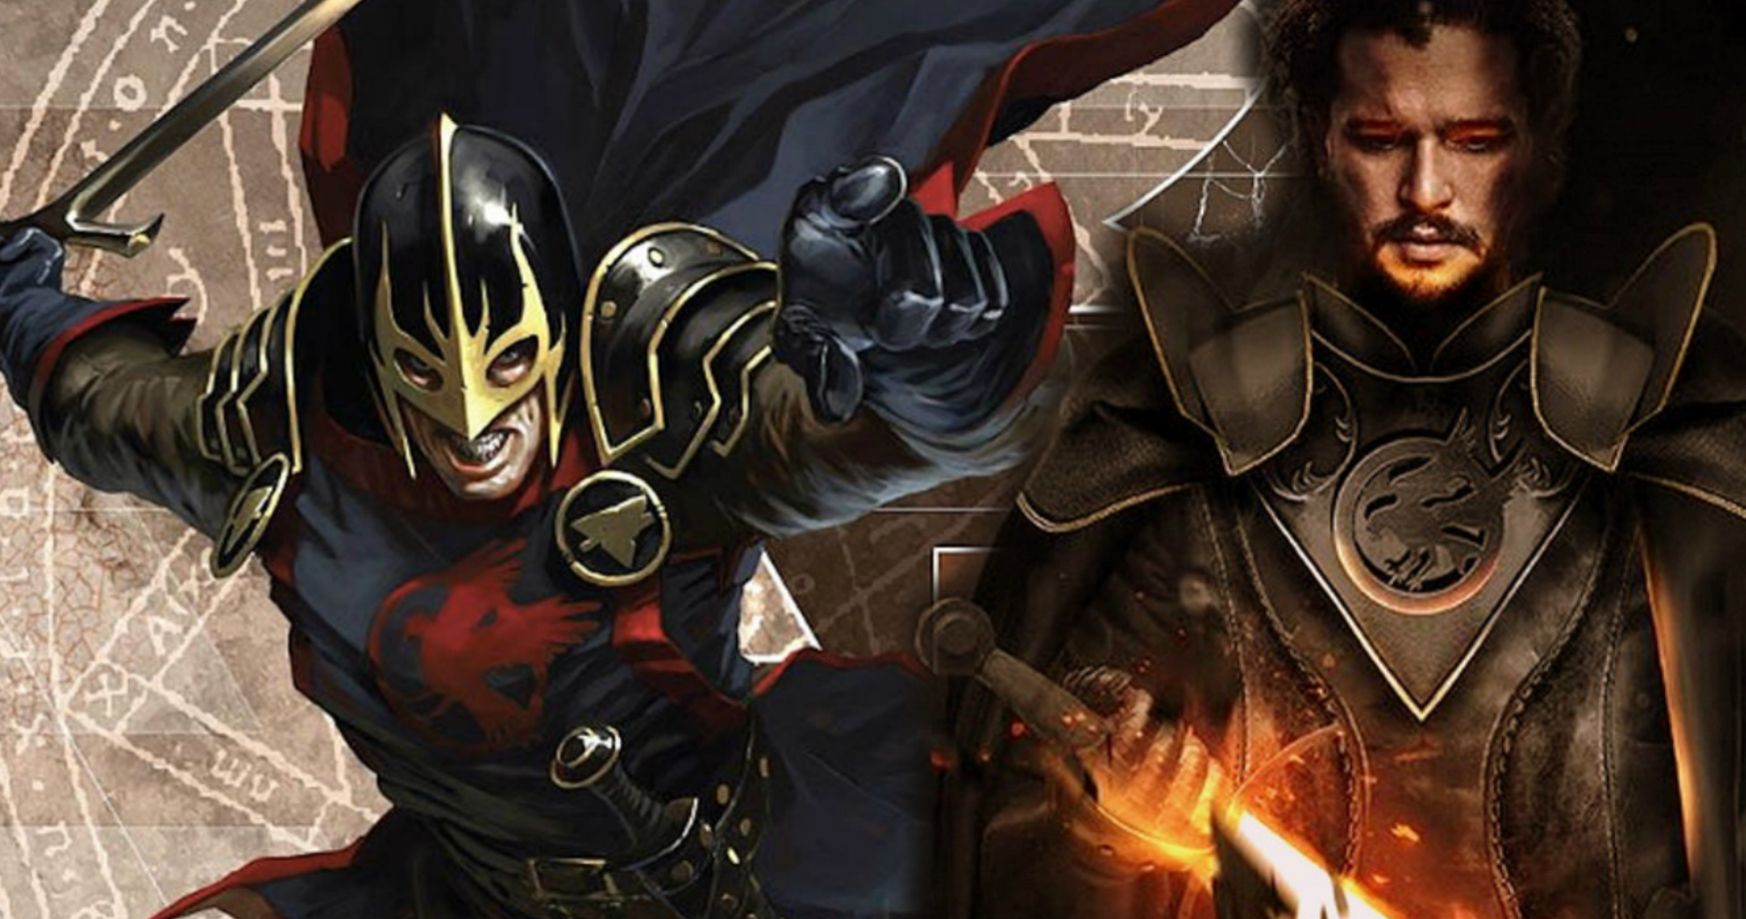 Latest Eternals Set Photo Teases Connection to Marvel's Black Knight